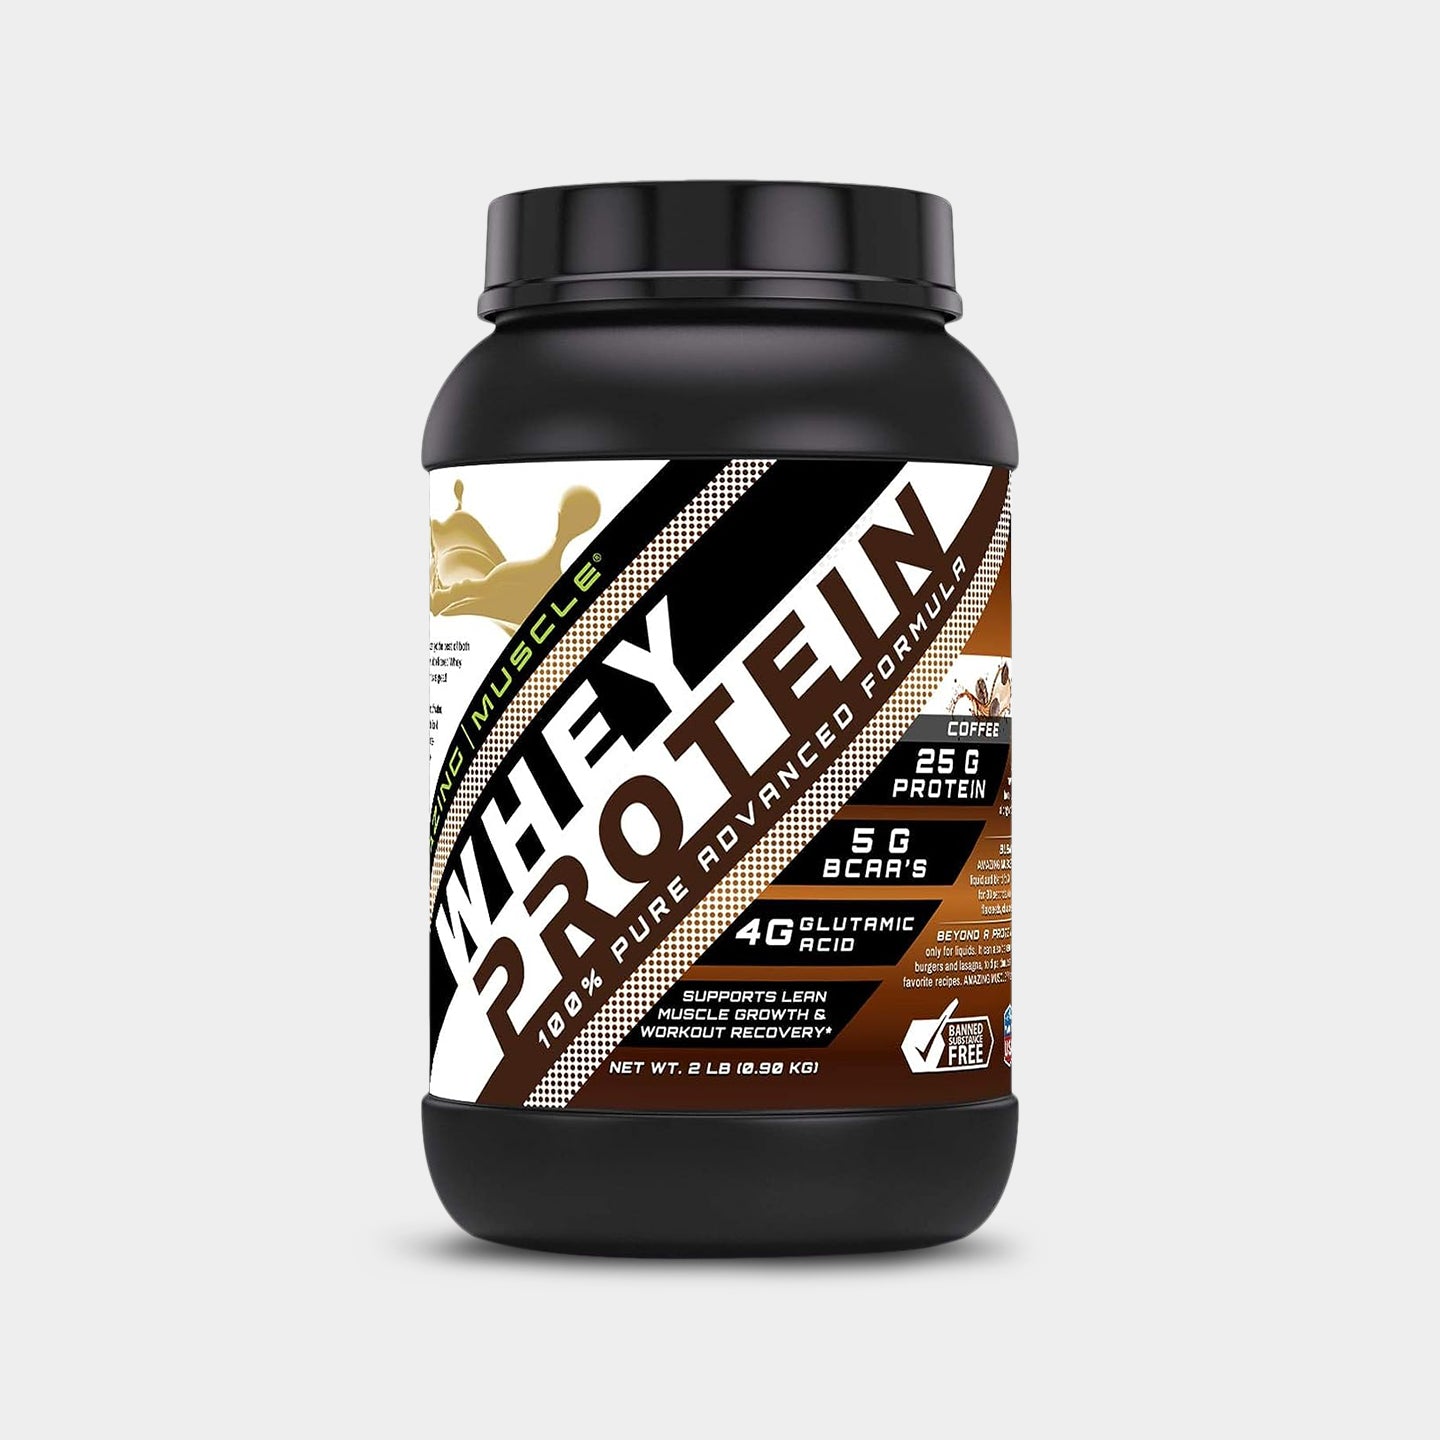 Amazing Muscle Whey Protein, Coffee, 2 Lbs A1